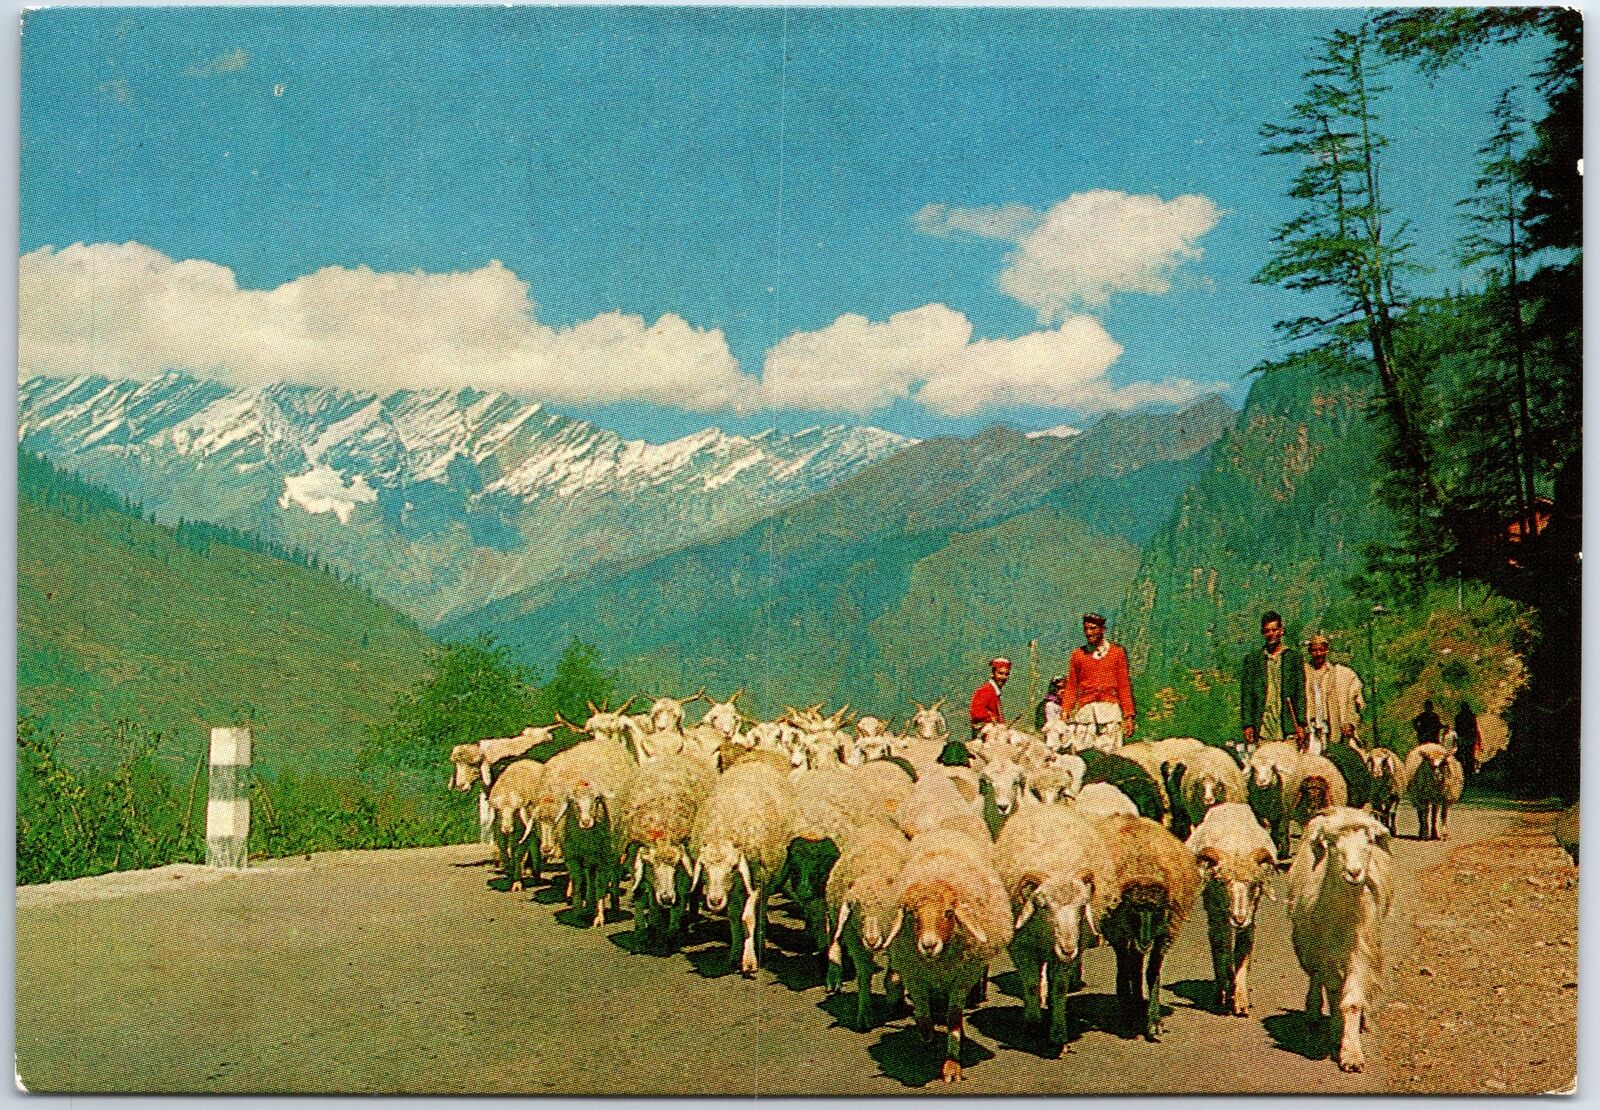 VINTAGE CONTINENTAL SIZED POSTCARD MANALI IN THE HIMALAYAS INDIA POSTED 1973